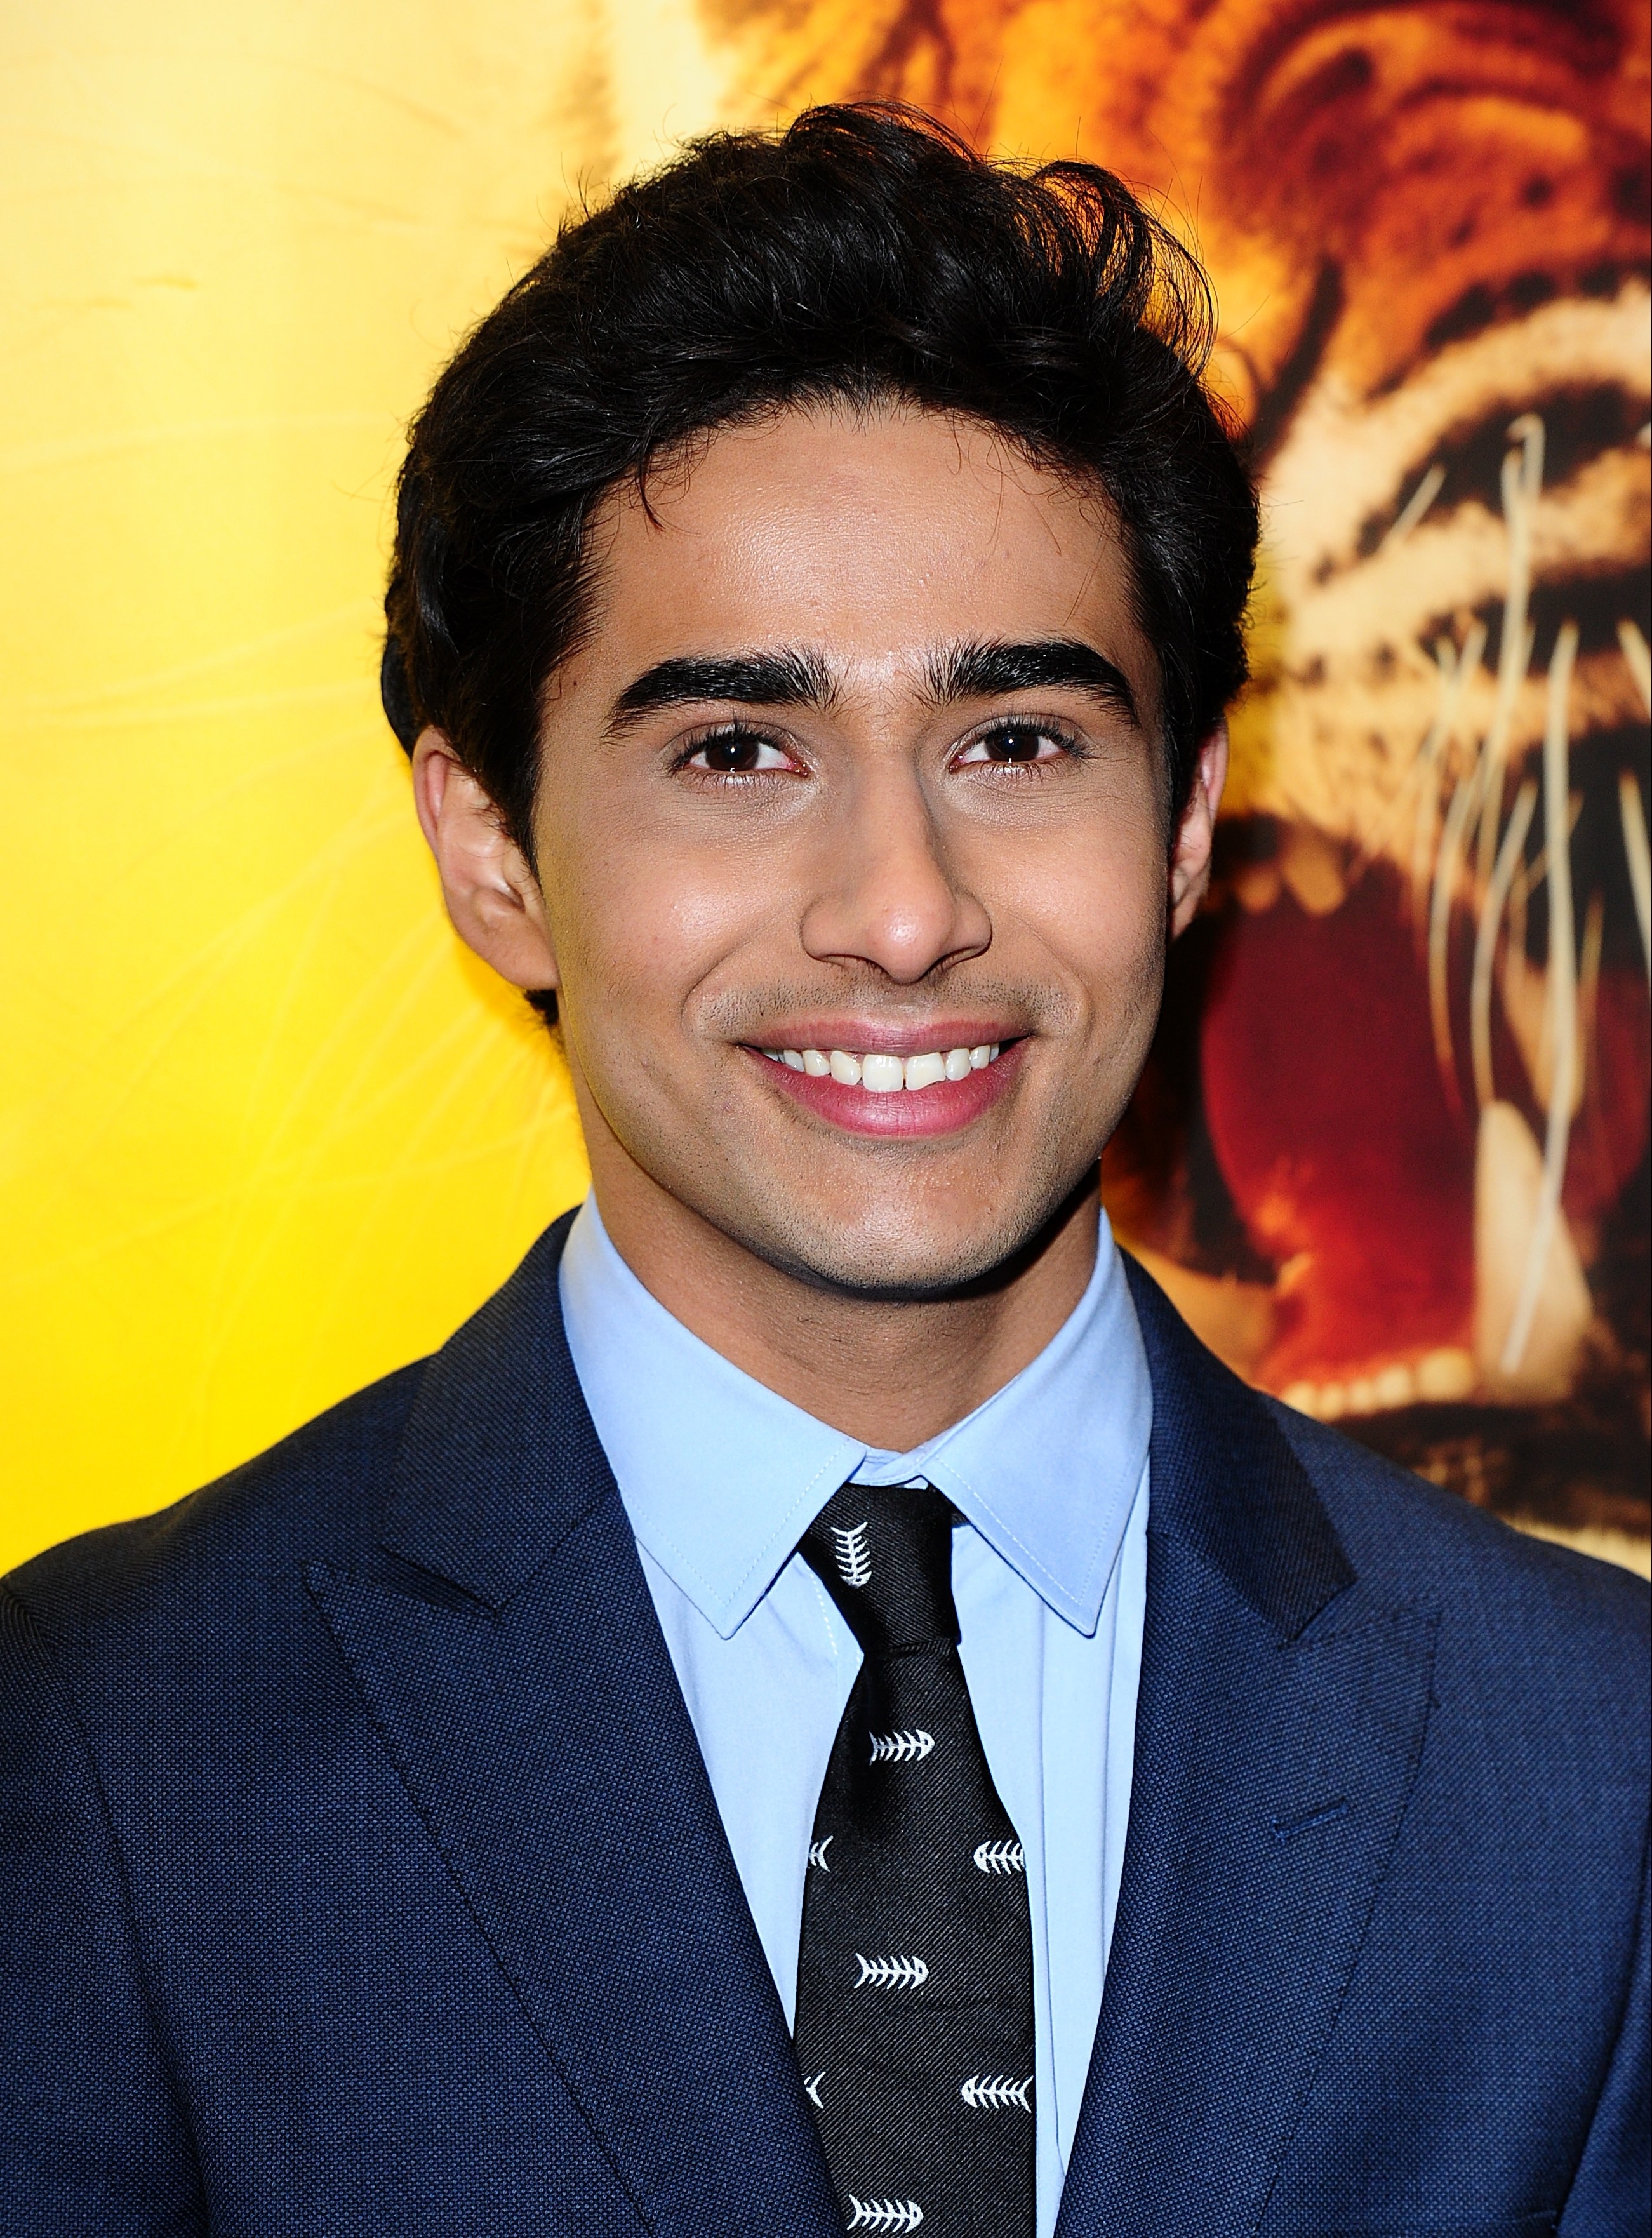 younger Suraj smiling in a suit